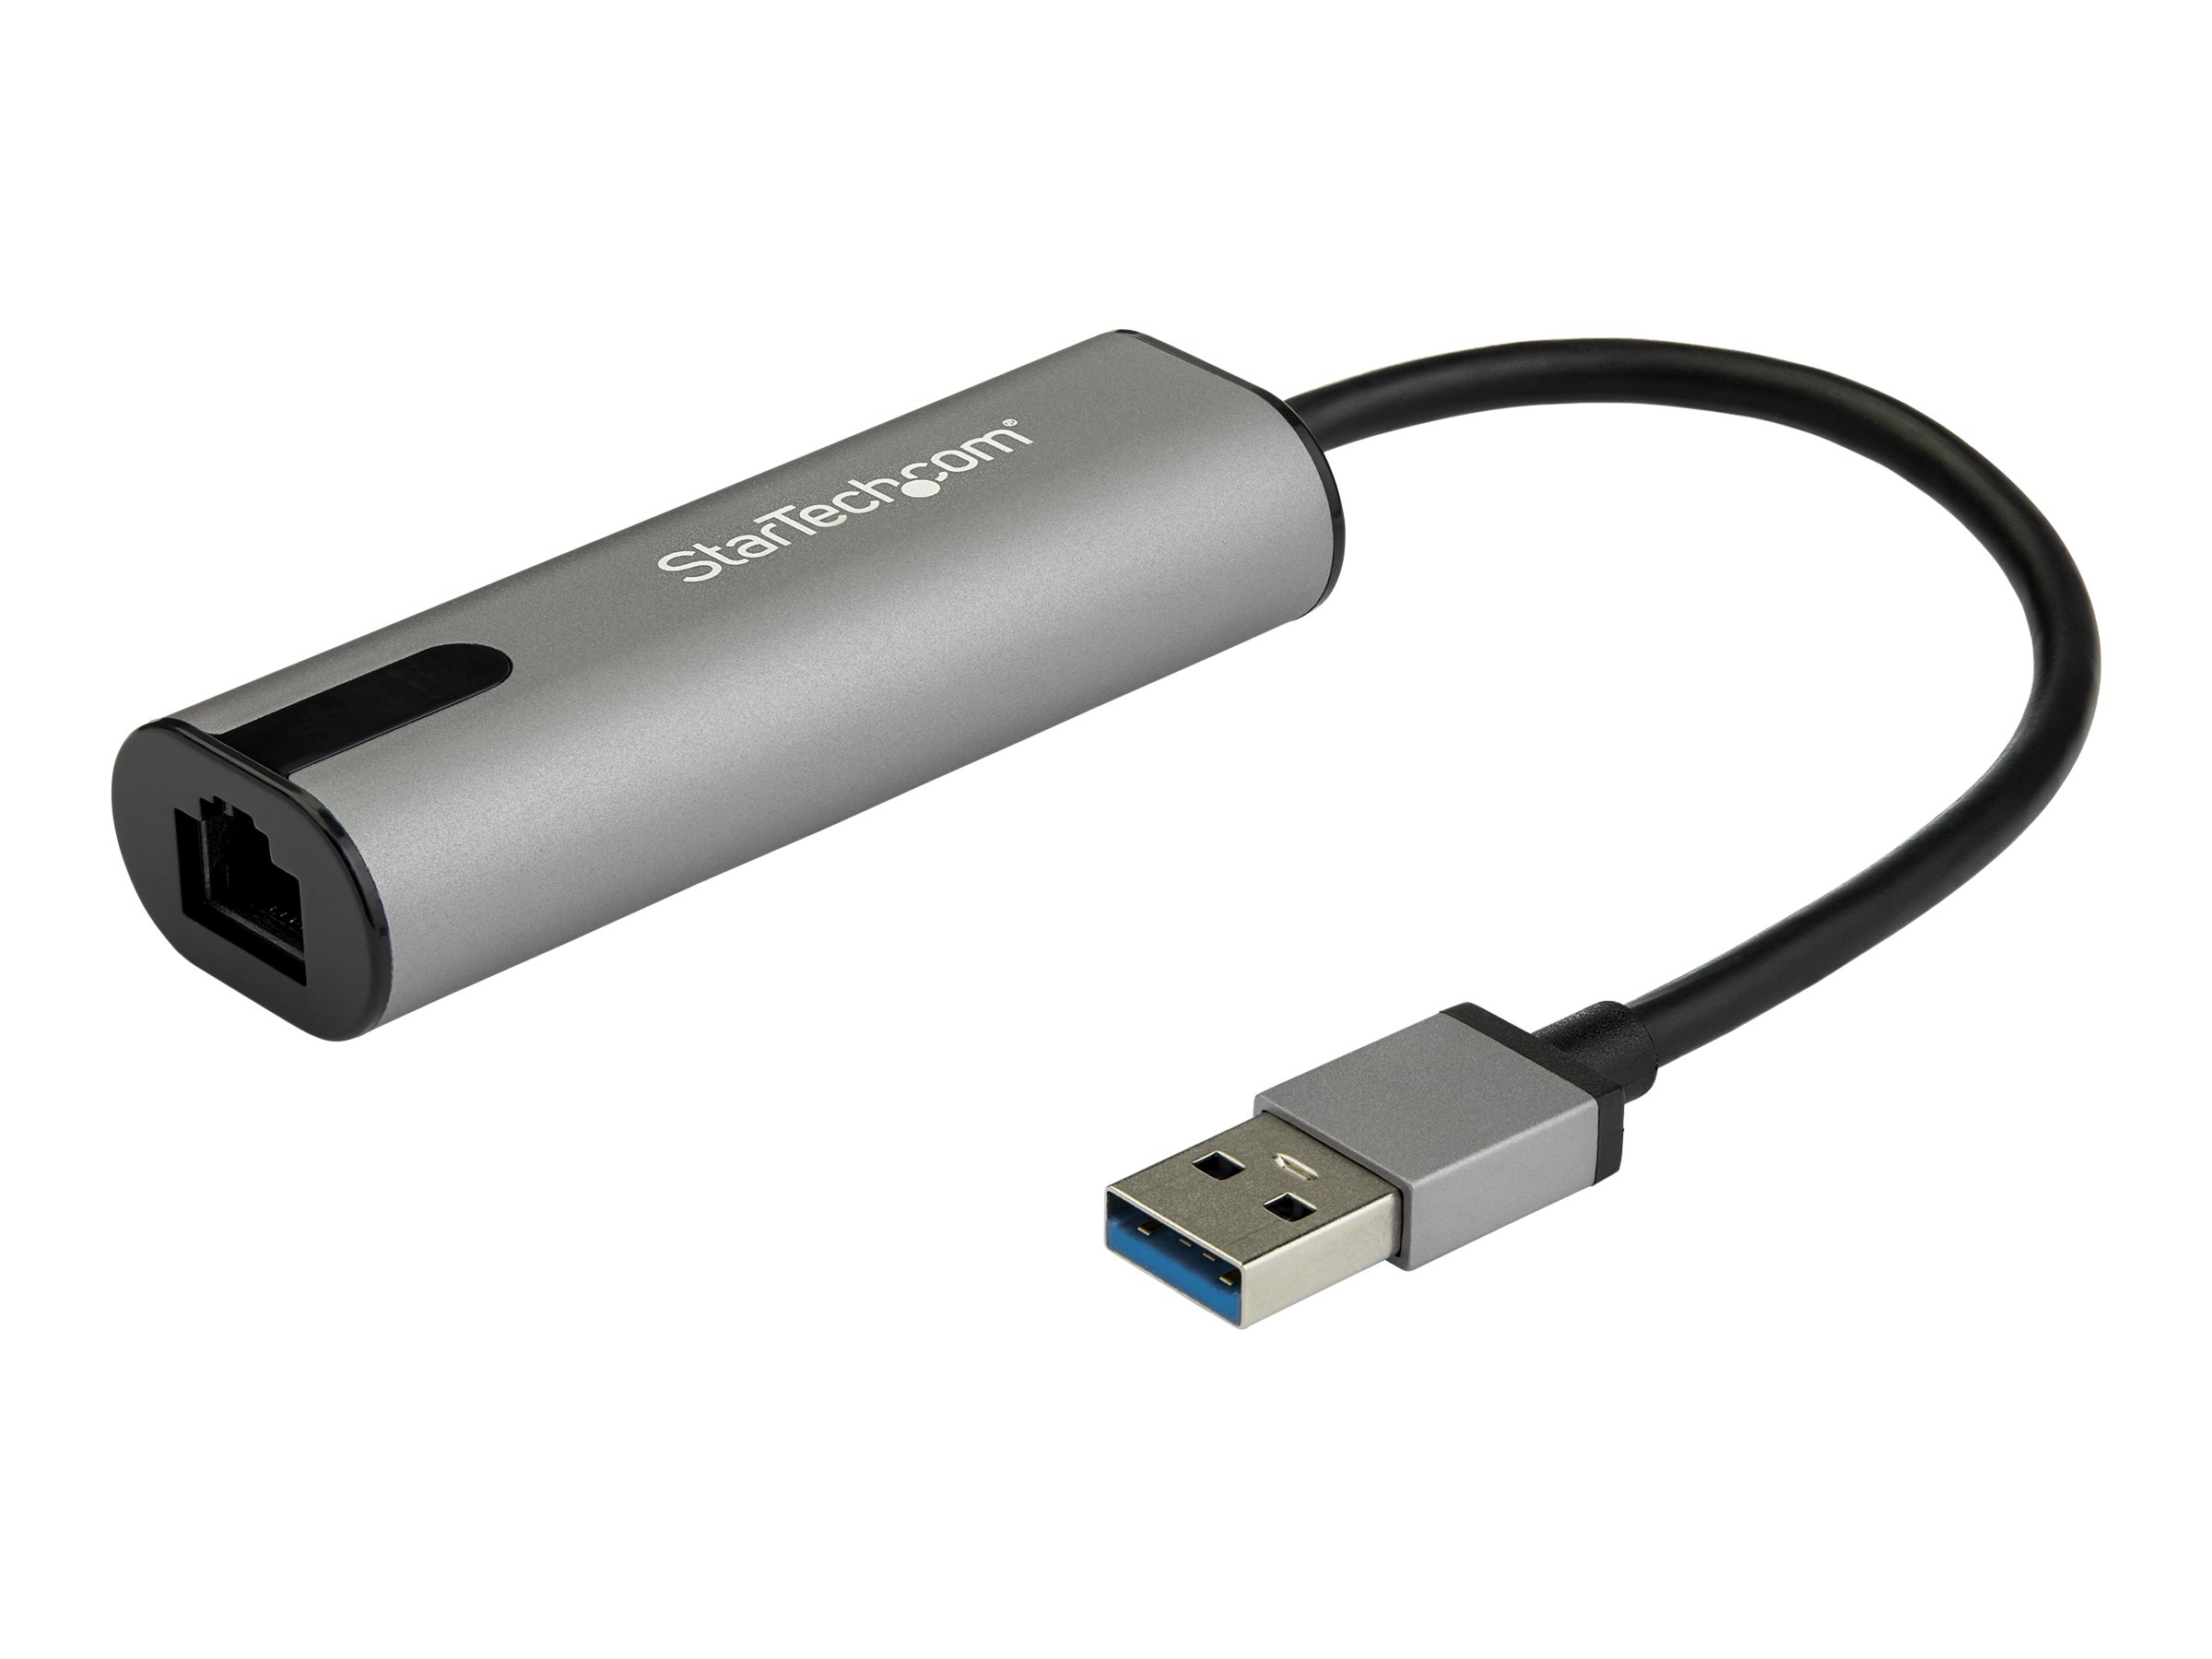 StarTech.com 2.5GbE USB Ethernet Adapter, NBASE-T USB 3.0 Type A